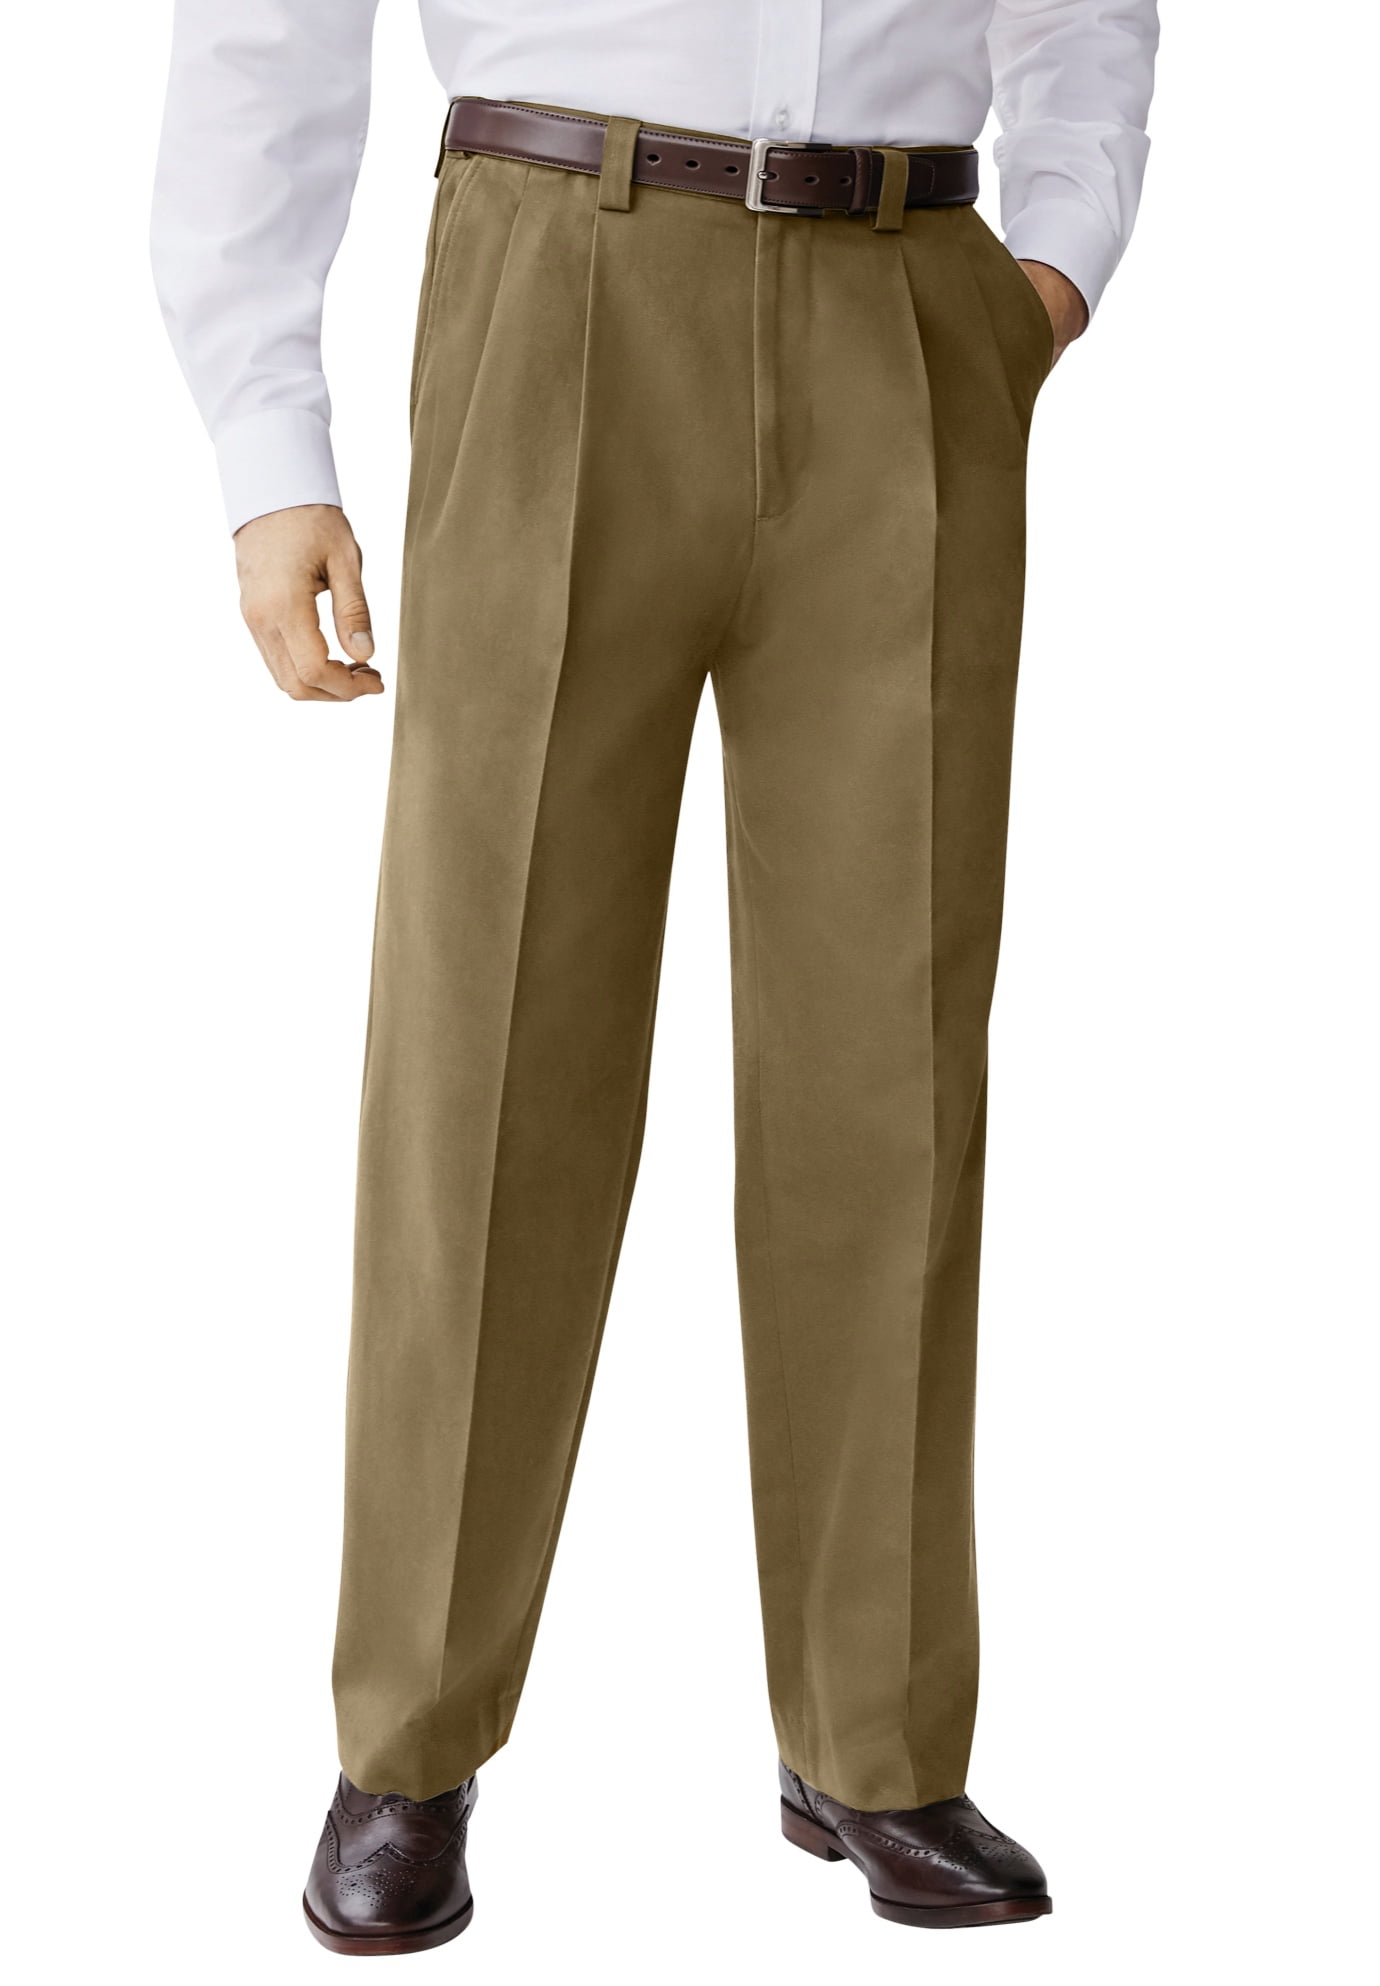 KingSize Mens Big & Tall Relaxed Fit Wrinkle-Free Expandable Waist Pleated Pants 